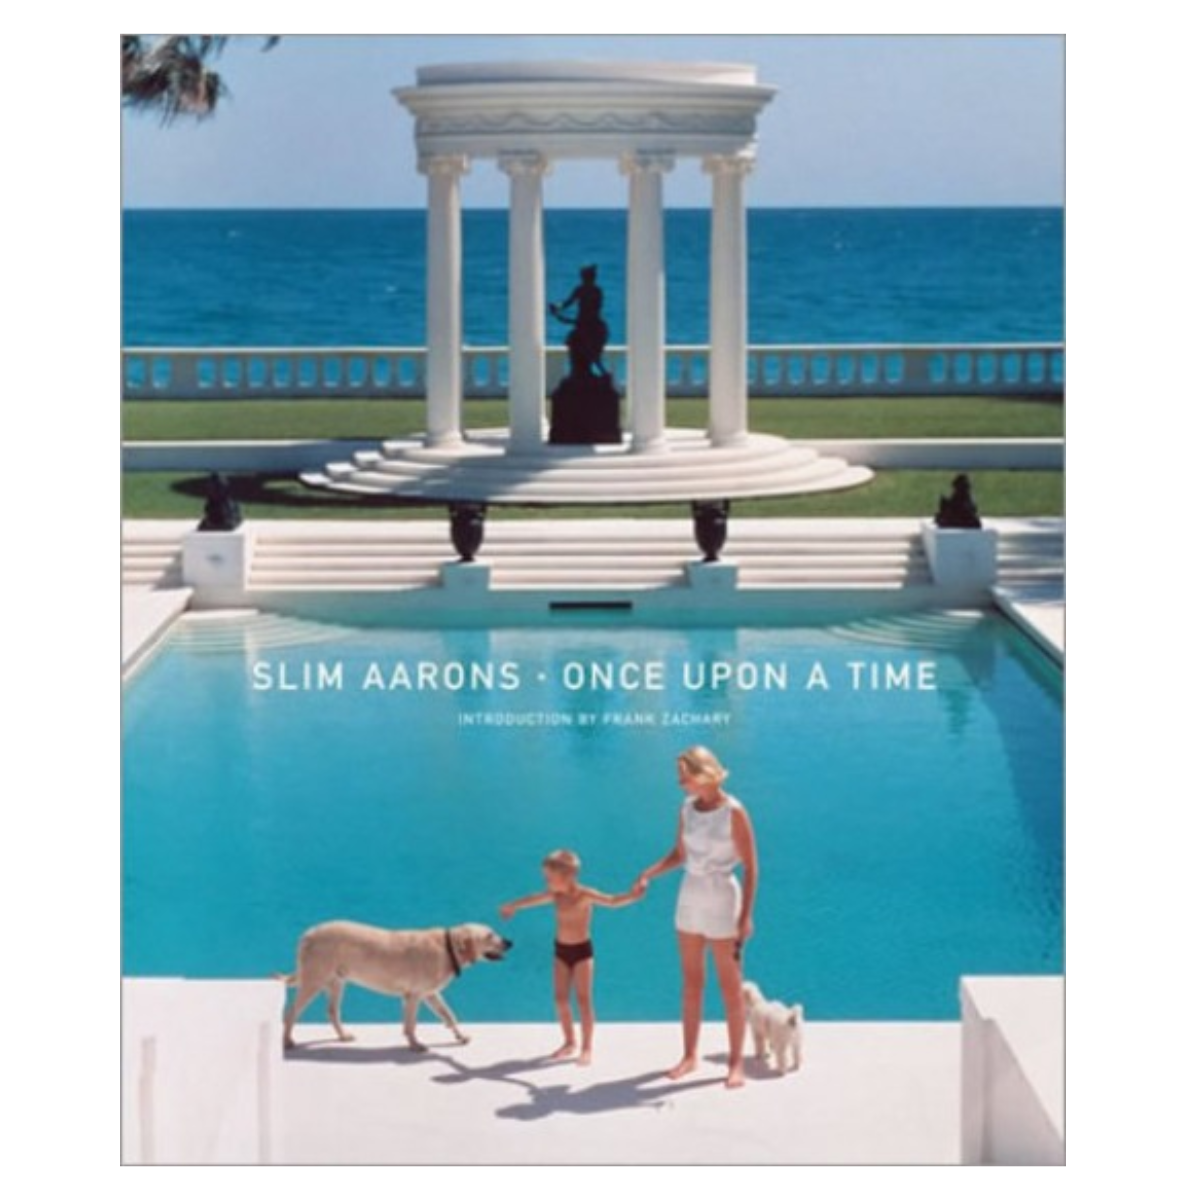 "Slim Aarons: Once Upon A Time"